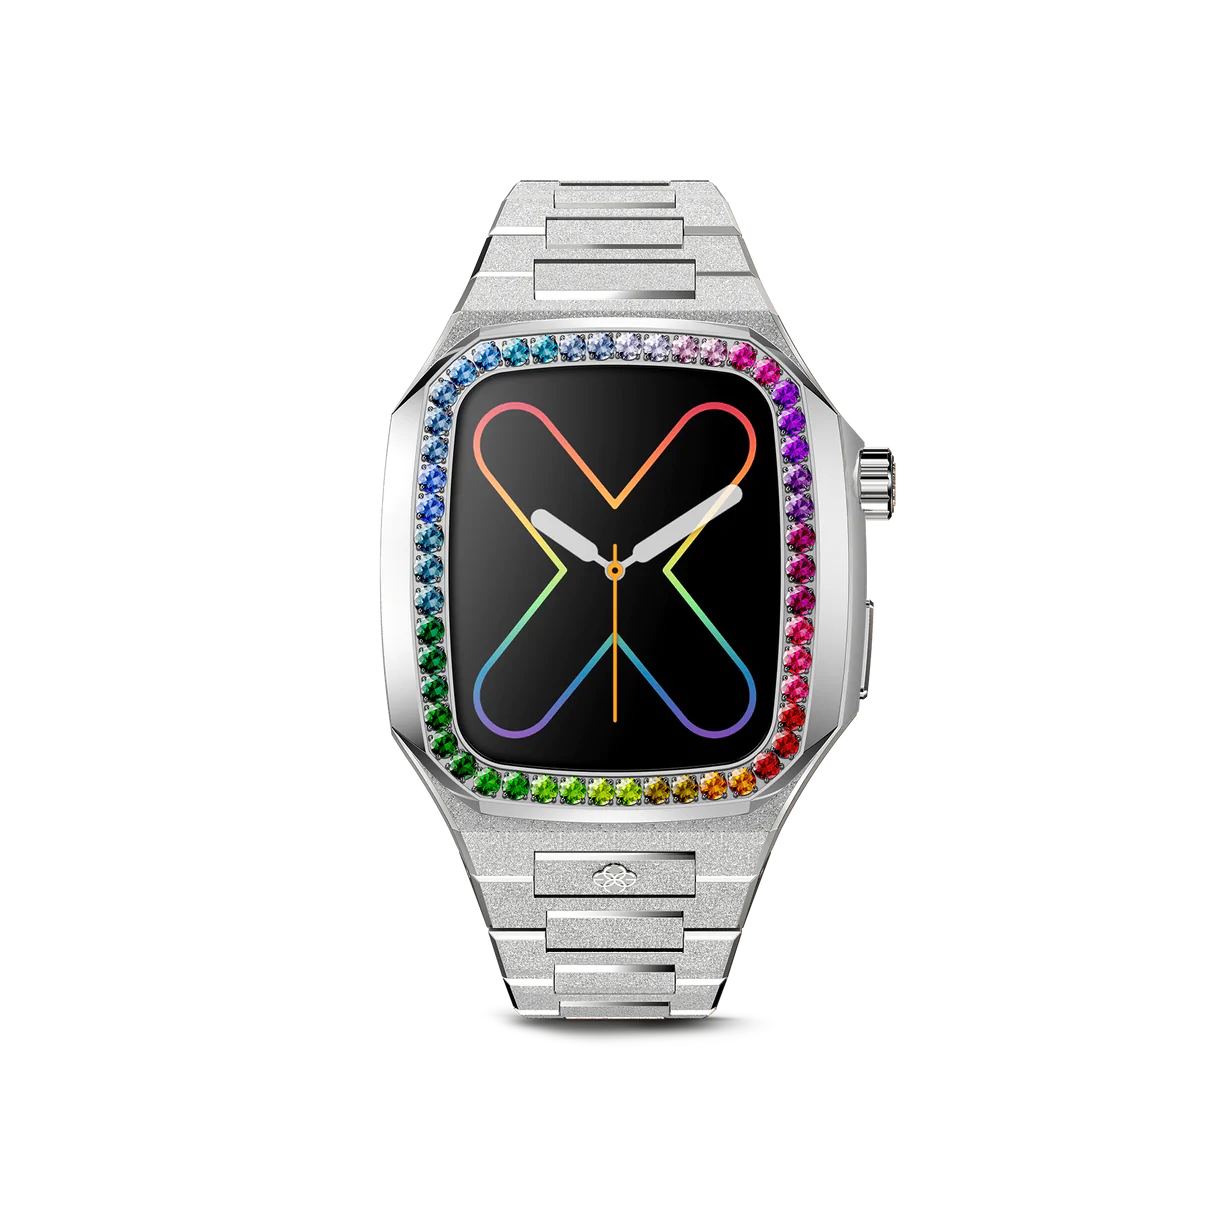 Golden Concept Apple Watch Case - EVF - RAINBOW Frosted Silver